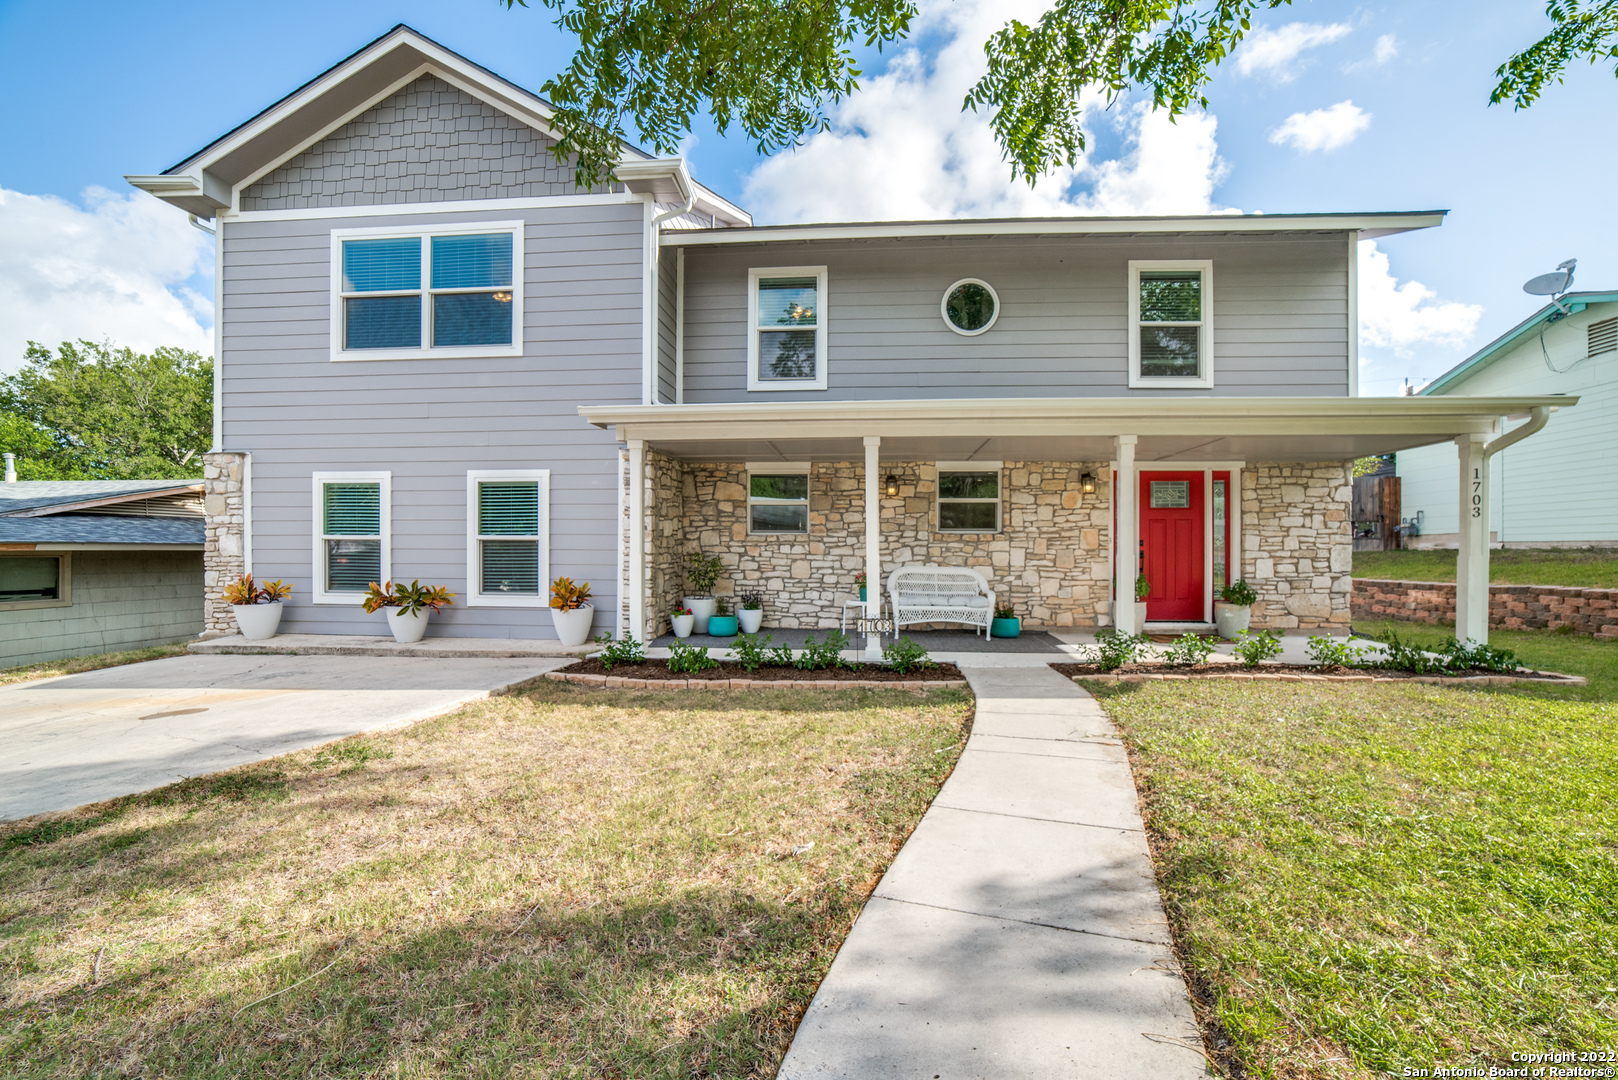 OPEN HOUSE July 2, 2-4 PM. A gem in a special AHISD neighborhood, this home was meticulously renovated top-to-bottom in 2018, complete with designer touches throughout, and not forgetting the important stuff- i.e., the plumbing, electric, HVAC, and roof/gutters (2022). Additional converted garage gives over 1,000 sq ft of living space, perfect for a family, with 4 bedrooms (all upstairs) and 3 full bathrooms. Kitchen is beautiful, with Maplewood cabinets, quartz countertops, and marble backsplash. High-end appliances including a Plenty of space on the island to serve your family, top-of-the-line appliances, and spacious pantry. Other highlights include hickory scraped hardwood floors, designer lighting throughout, and a great sized yard. Walking distance to restaurants, shopping, and Howard ECC.